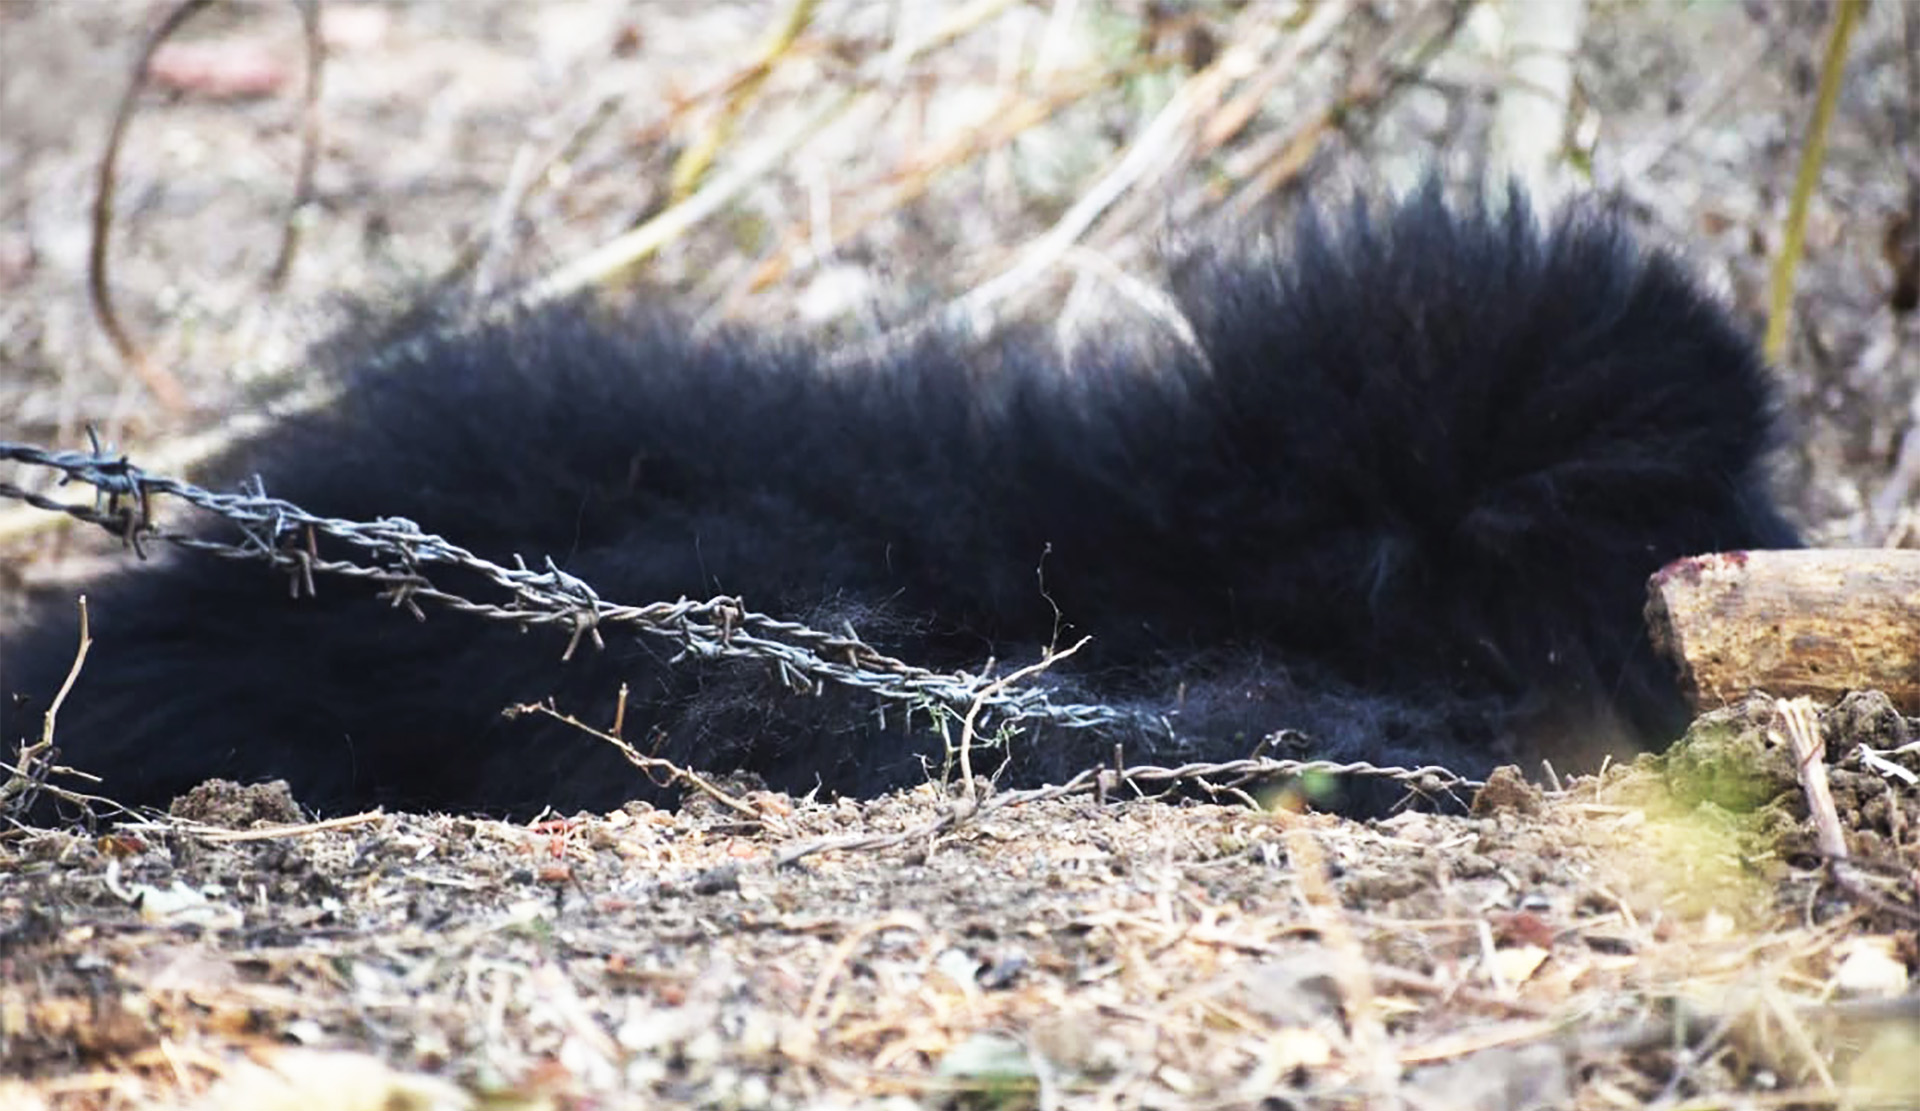 Bear Cub Rescued From The Menacing Grasp Of Barbed Wires - Wildlife SOS